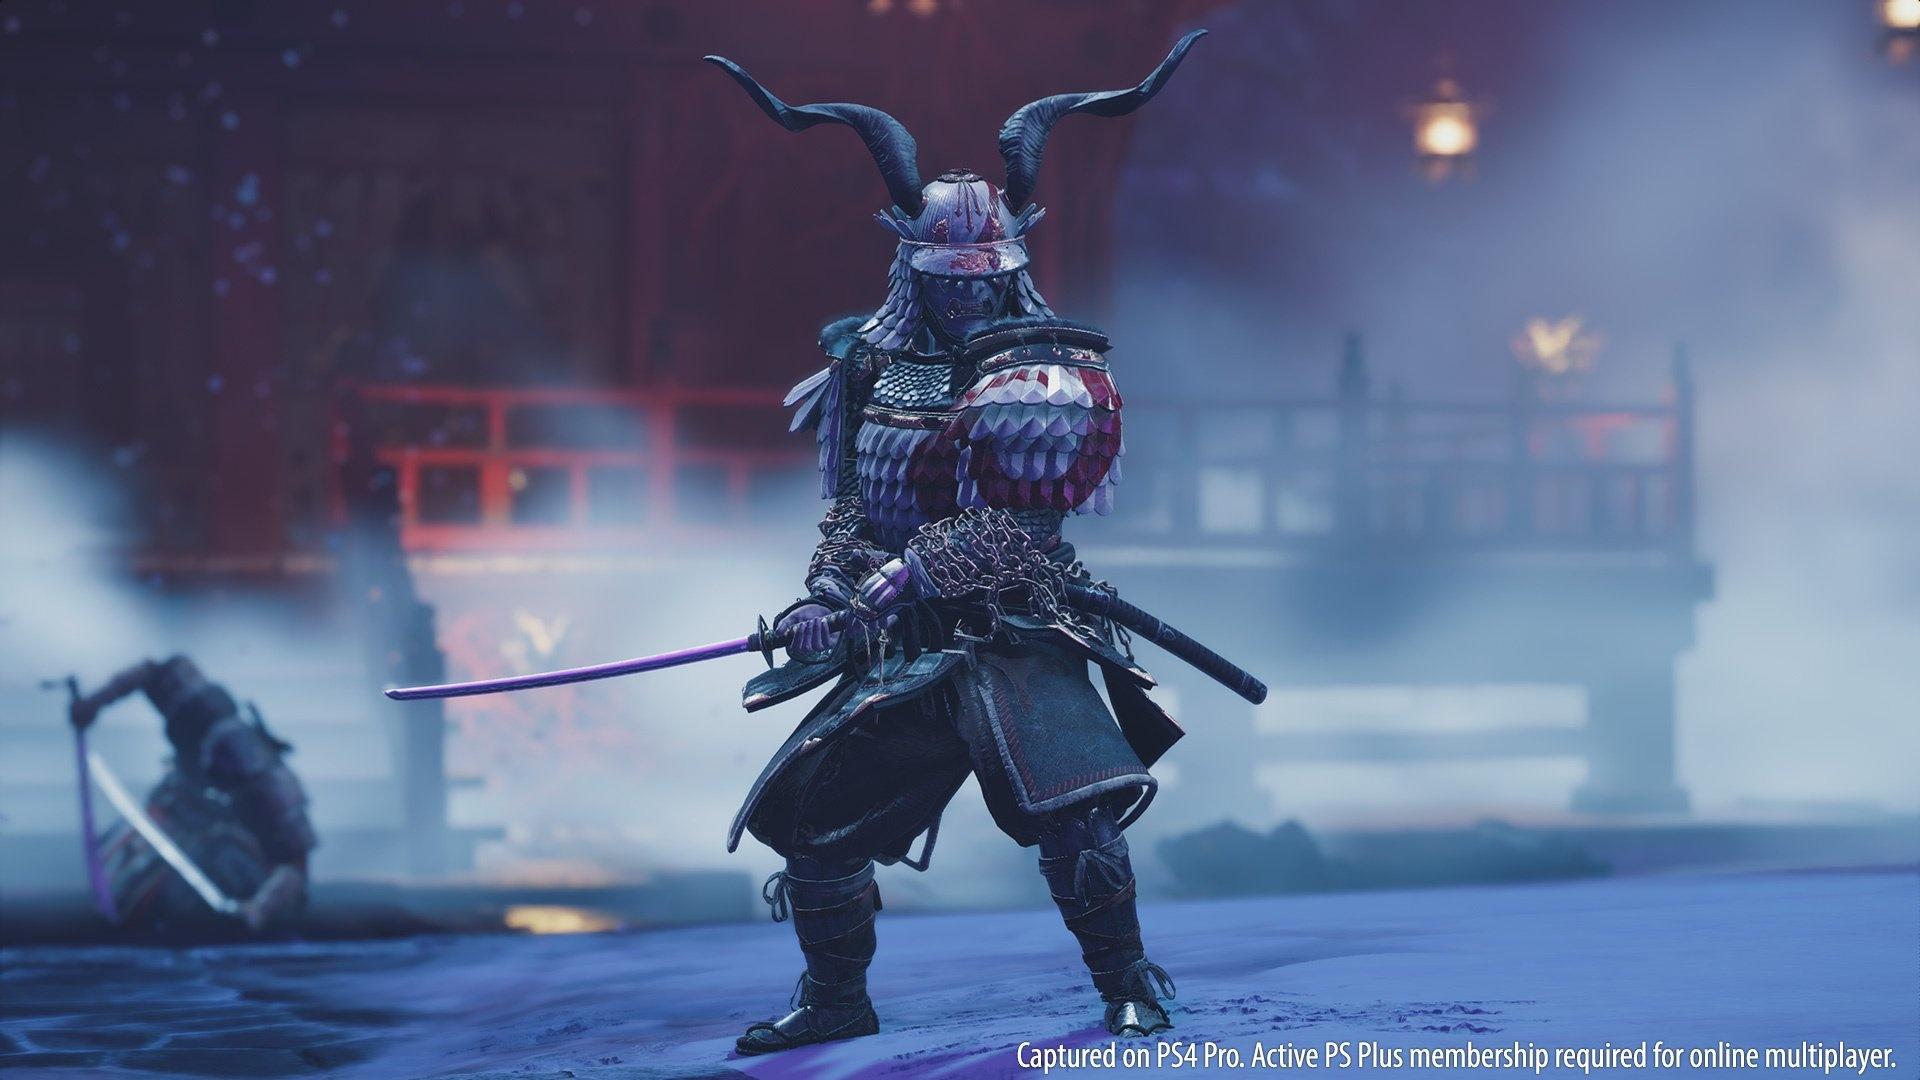 How to Get the God of War armor in Ghost of Tsushima